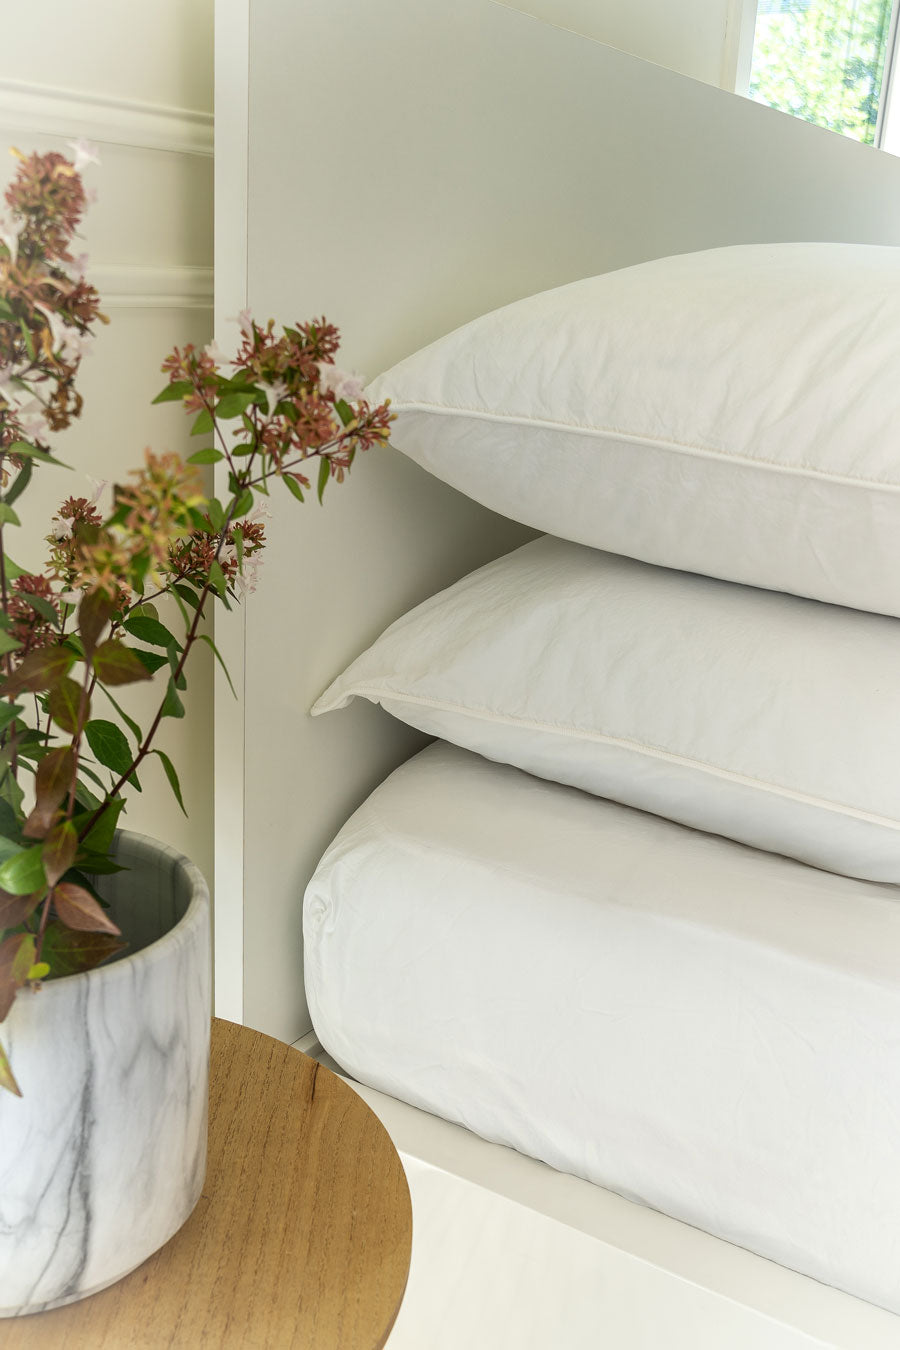 Detail of the corner of the bed with two white pillowcases and a white Organic Cotton Percale fitted sheet.